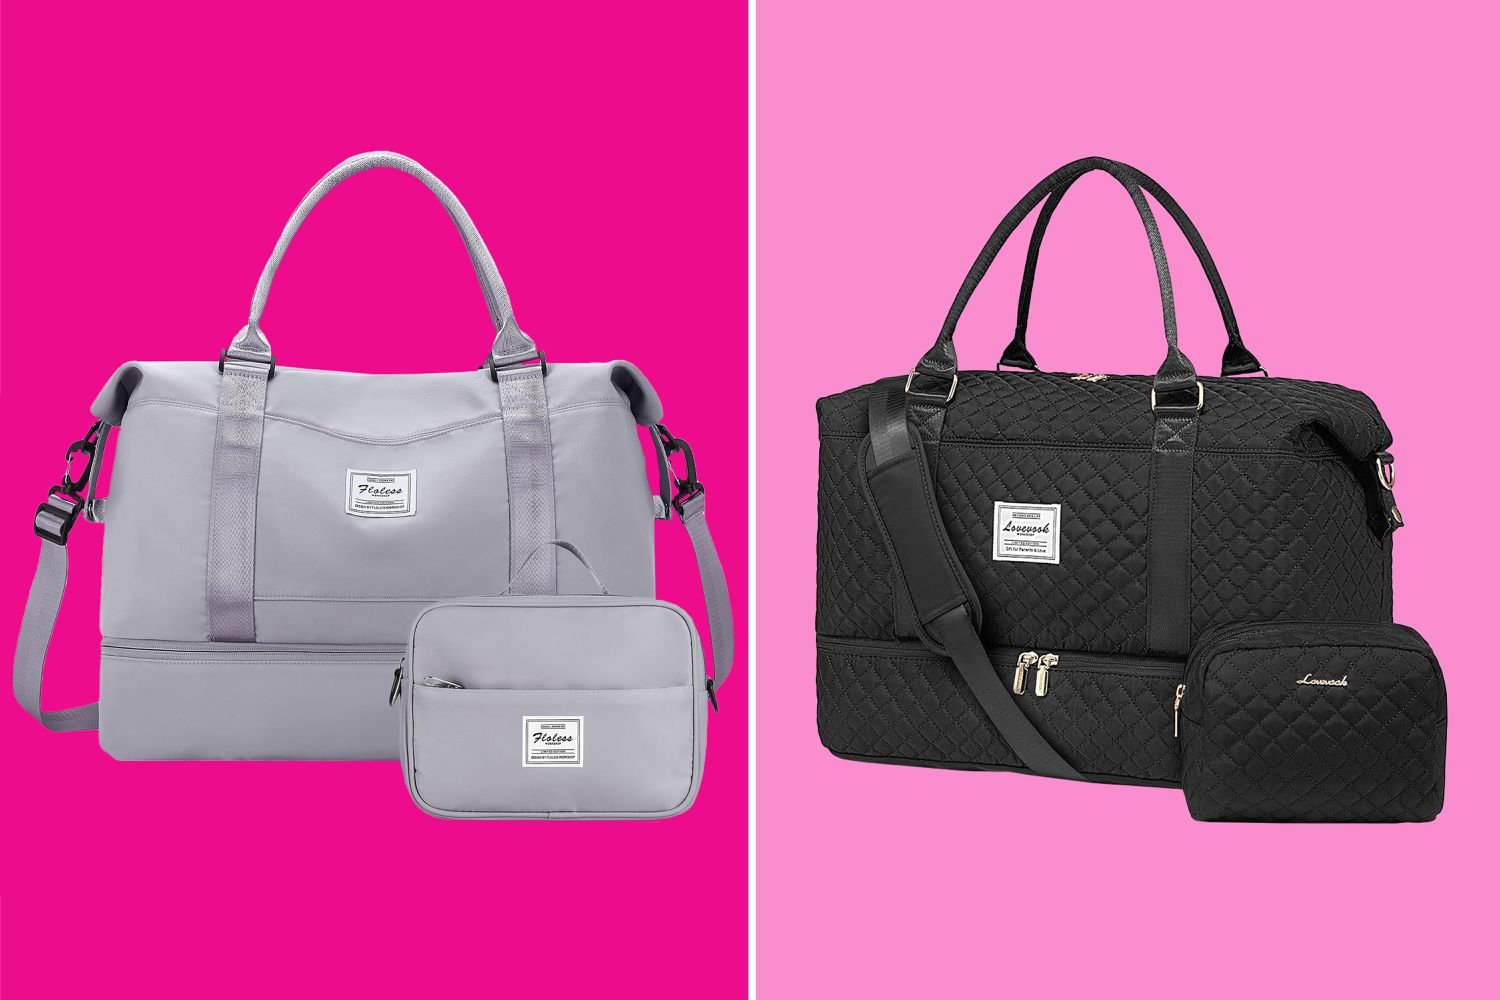 Overpackers Swear by These Spacious Weekender Bags That Hold 'Everything and More,' and They Start at $24 on Amazon Tout